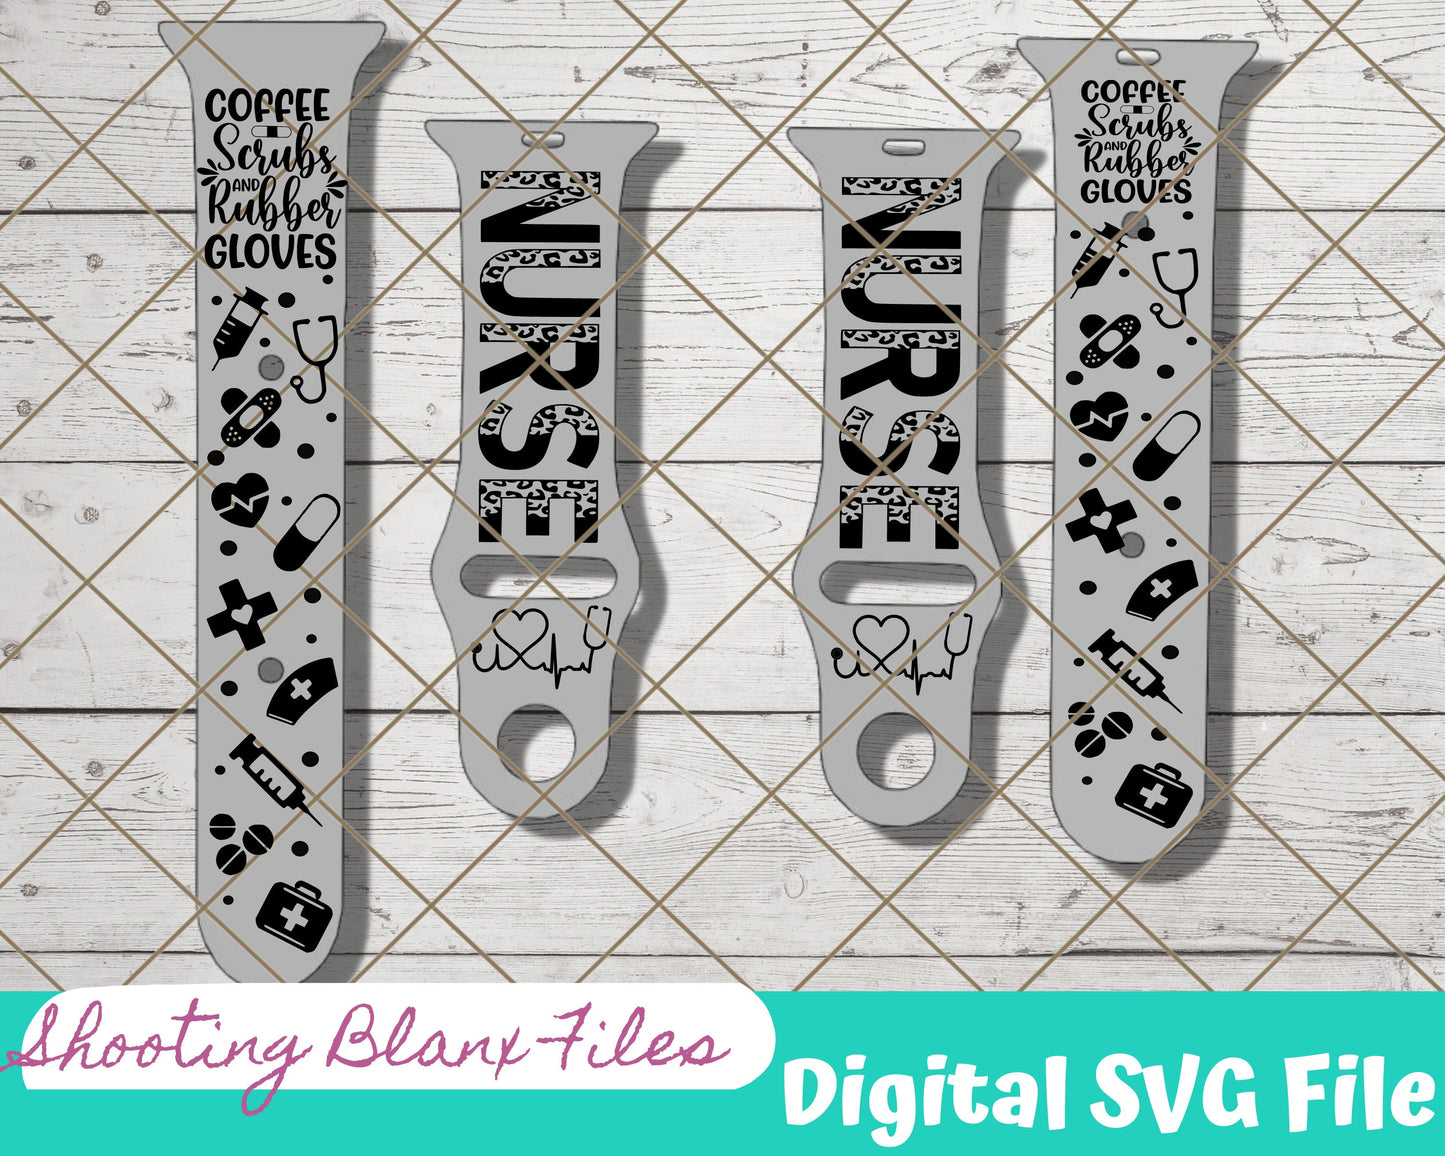 Nurse Doctor Heartbeat Watch band, SVG Digital File for Watch bands, laser file, Glowforge file, engraving, Needle, band aid, Cheetah print